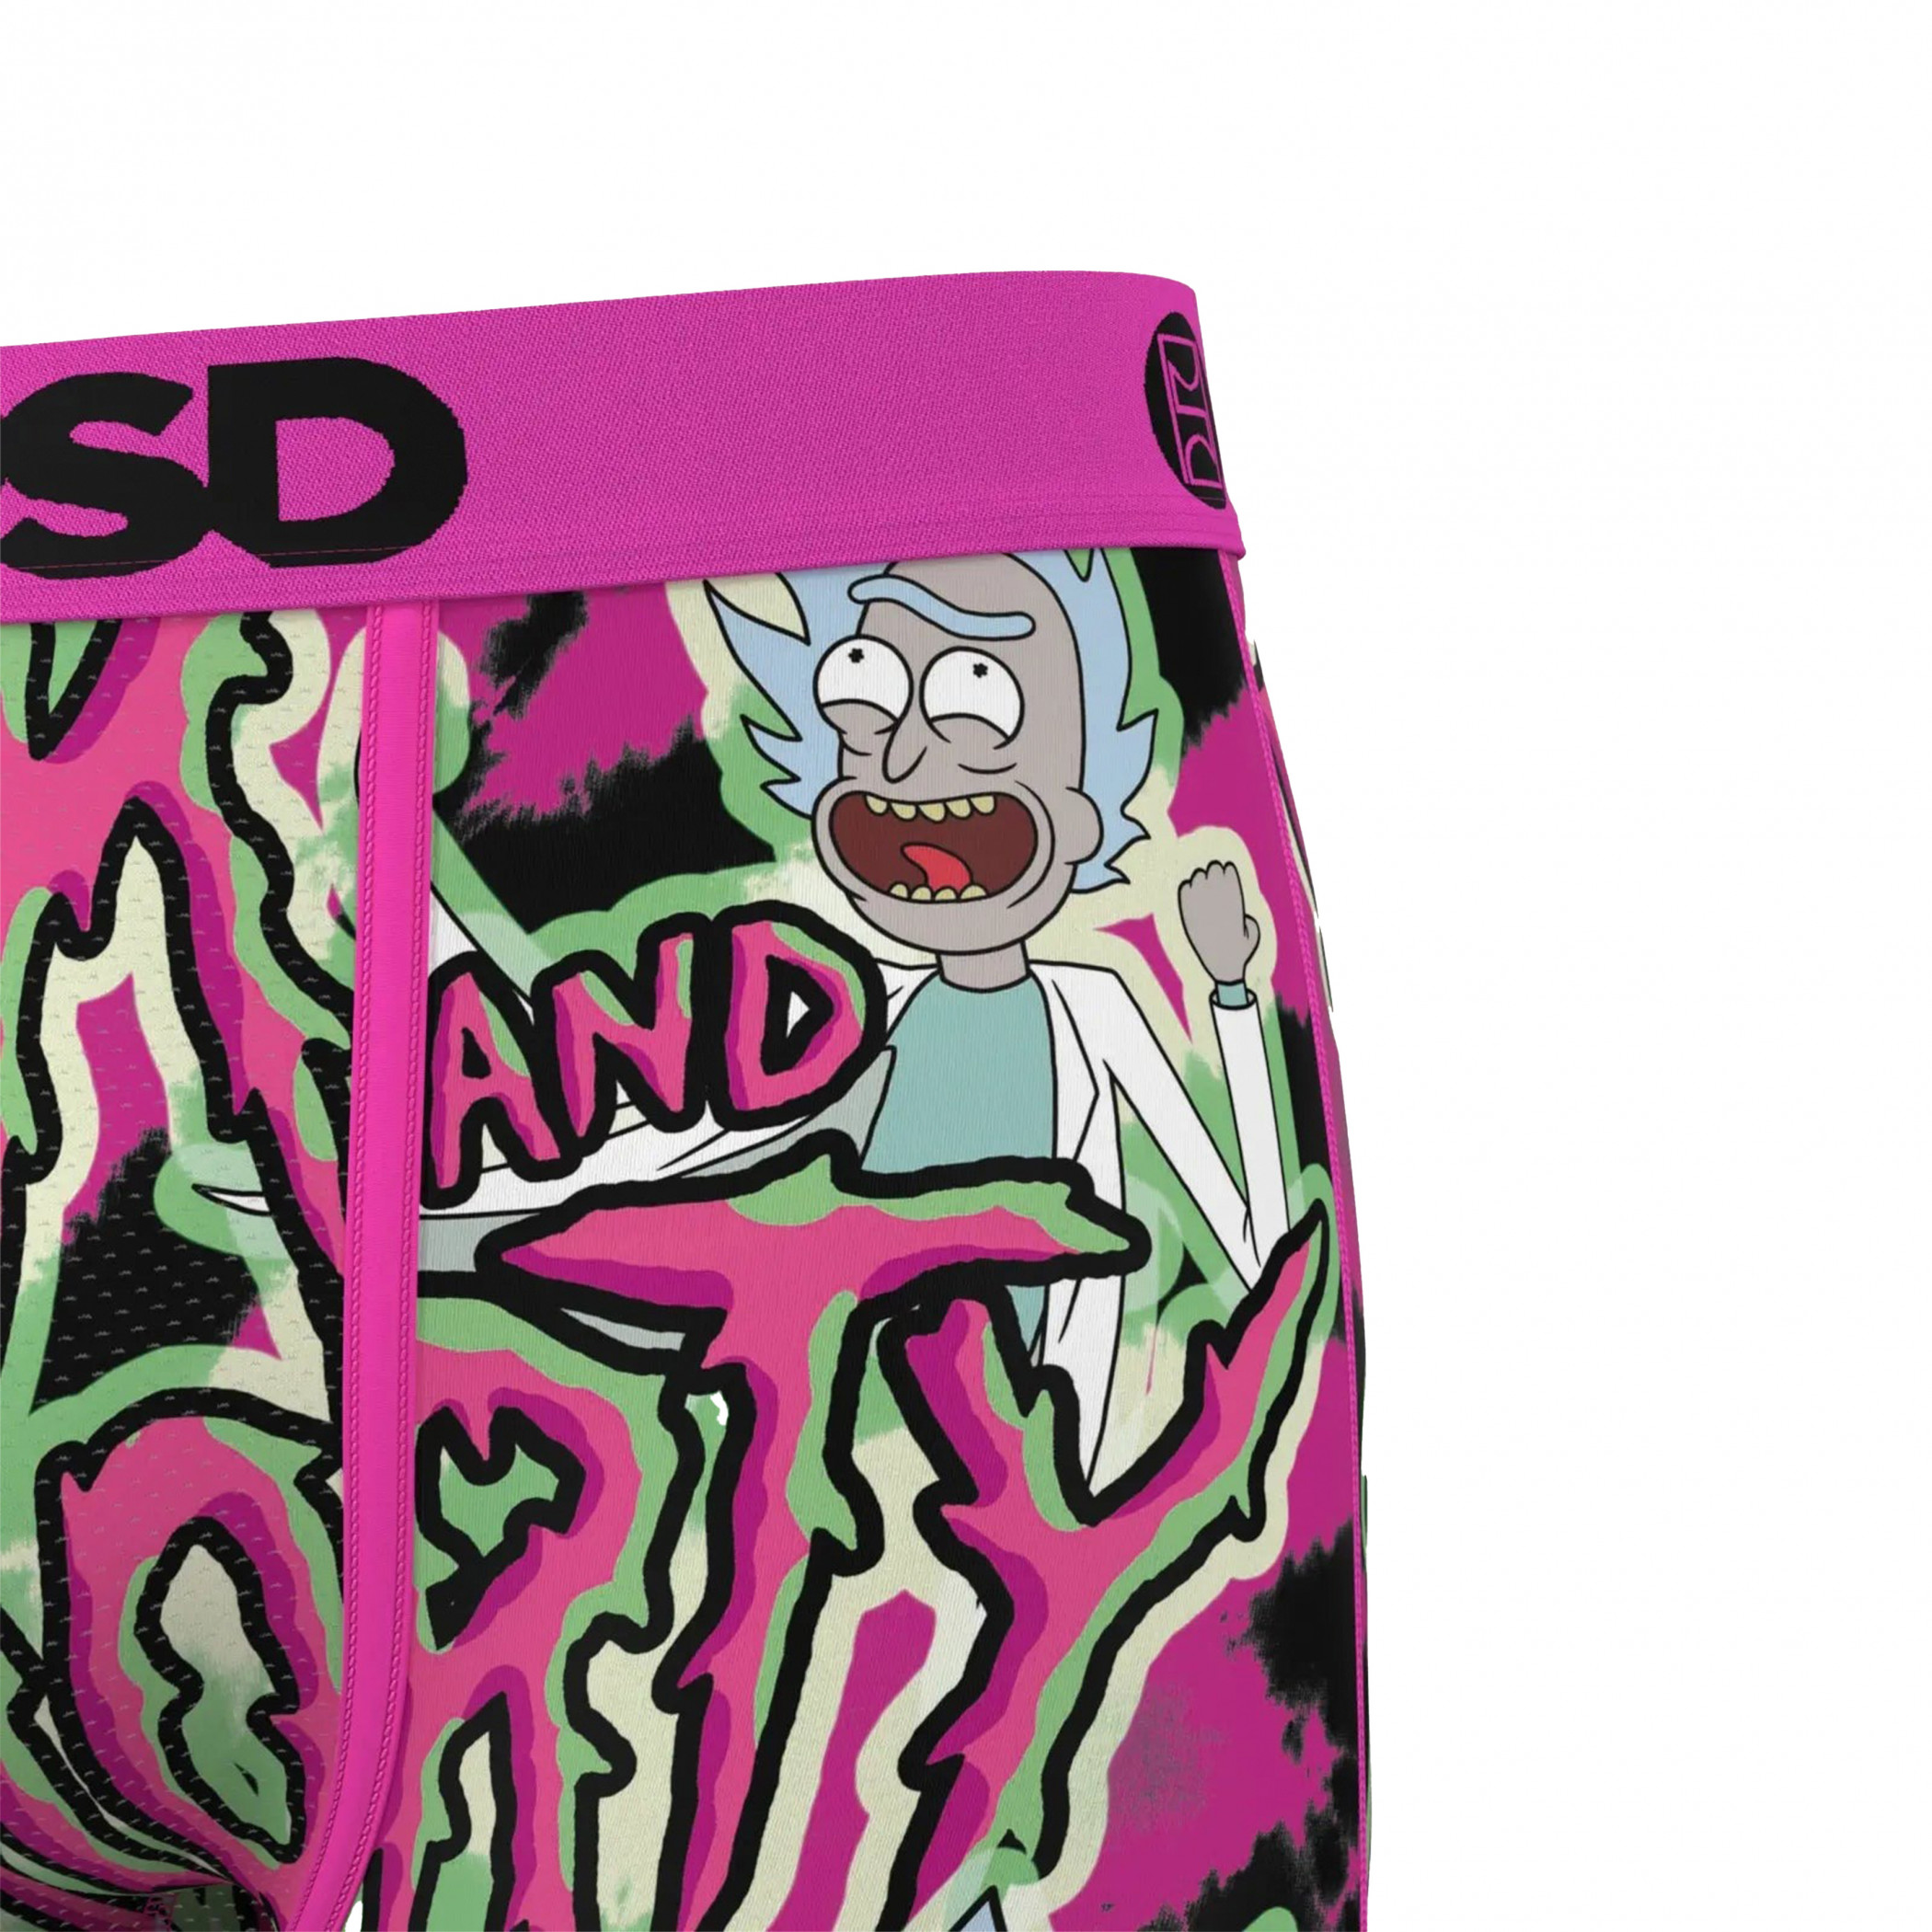 Rick and Morty Tie-Dye Drinks PSD Boxer Briefs